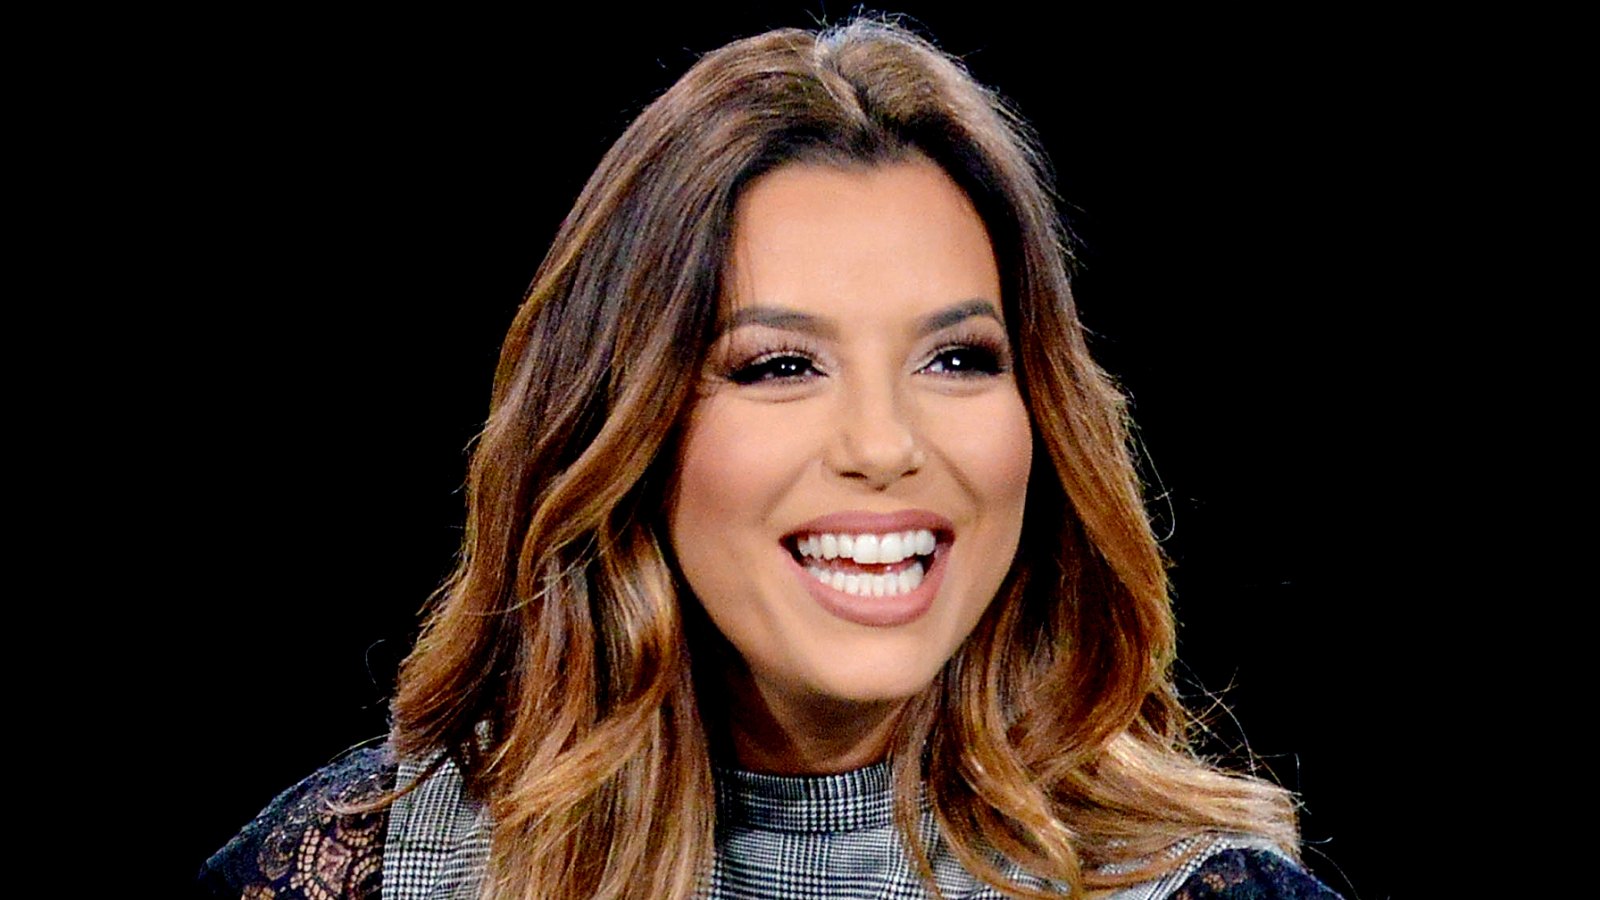 Eva Longoria speaks on stage at The 2017 MAKERS Conference at Terranea Resort and Spa on February 7, 2017 in Rancho Palos Verdes, California.